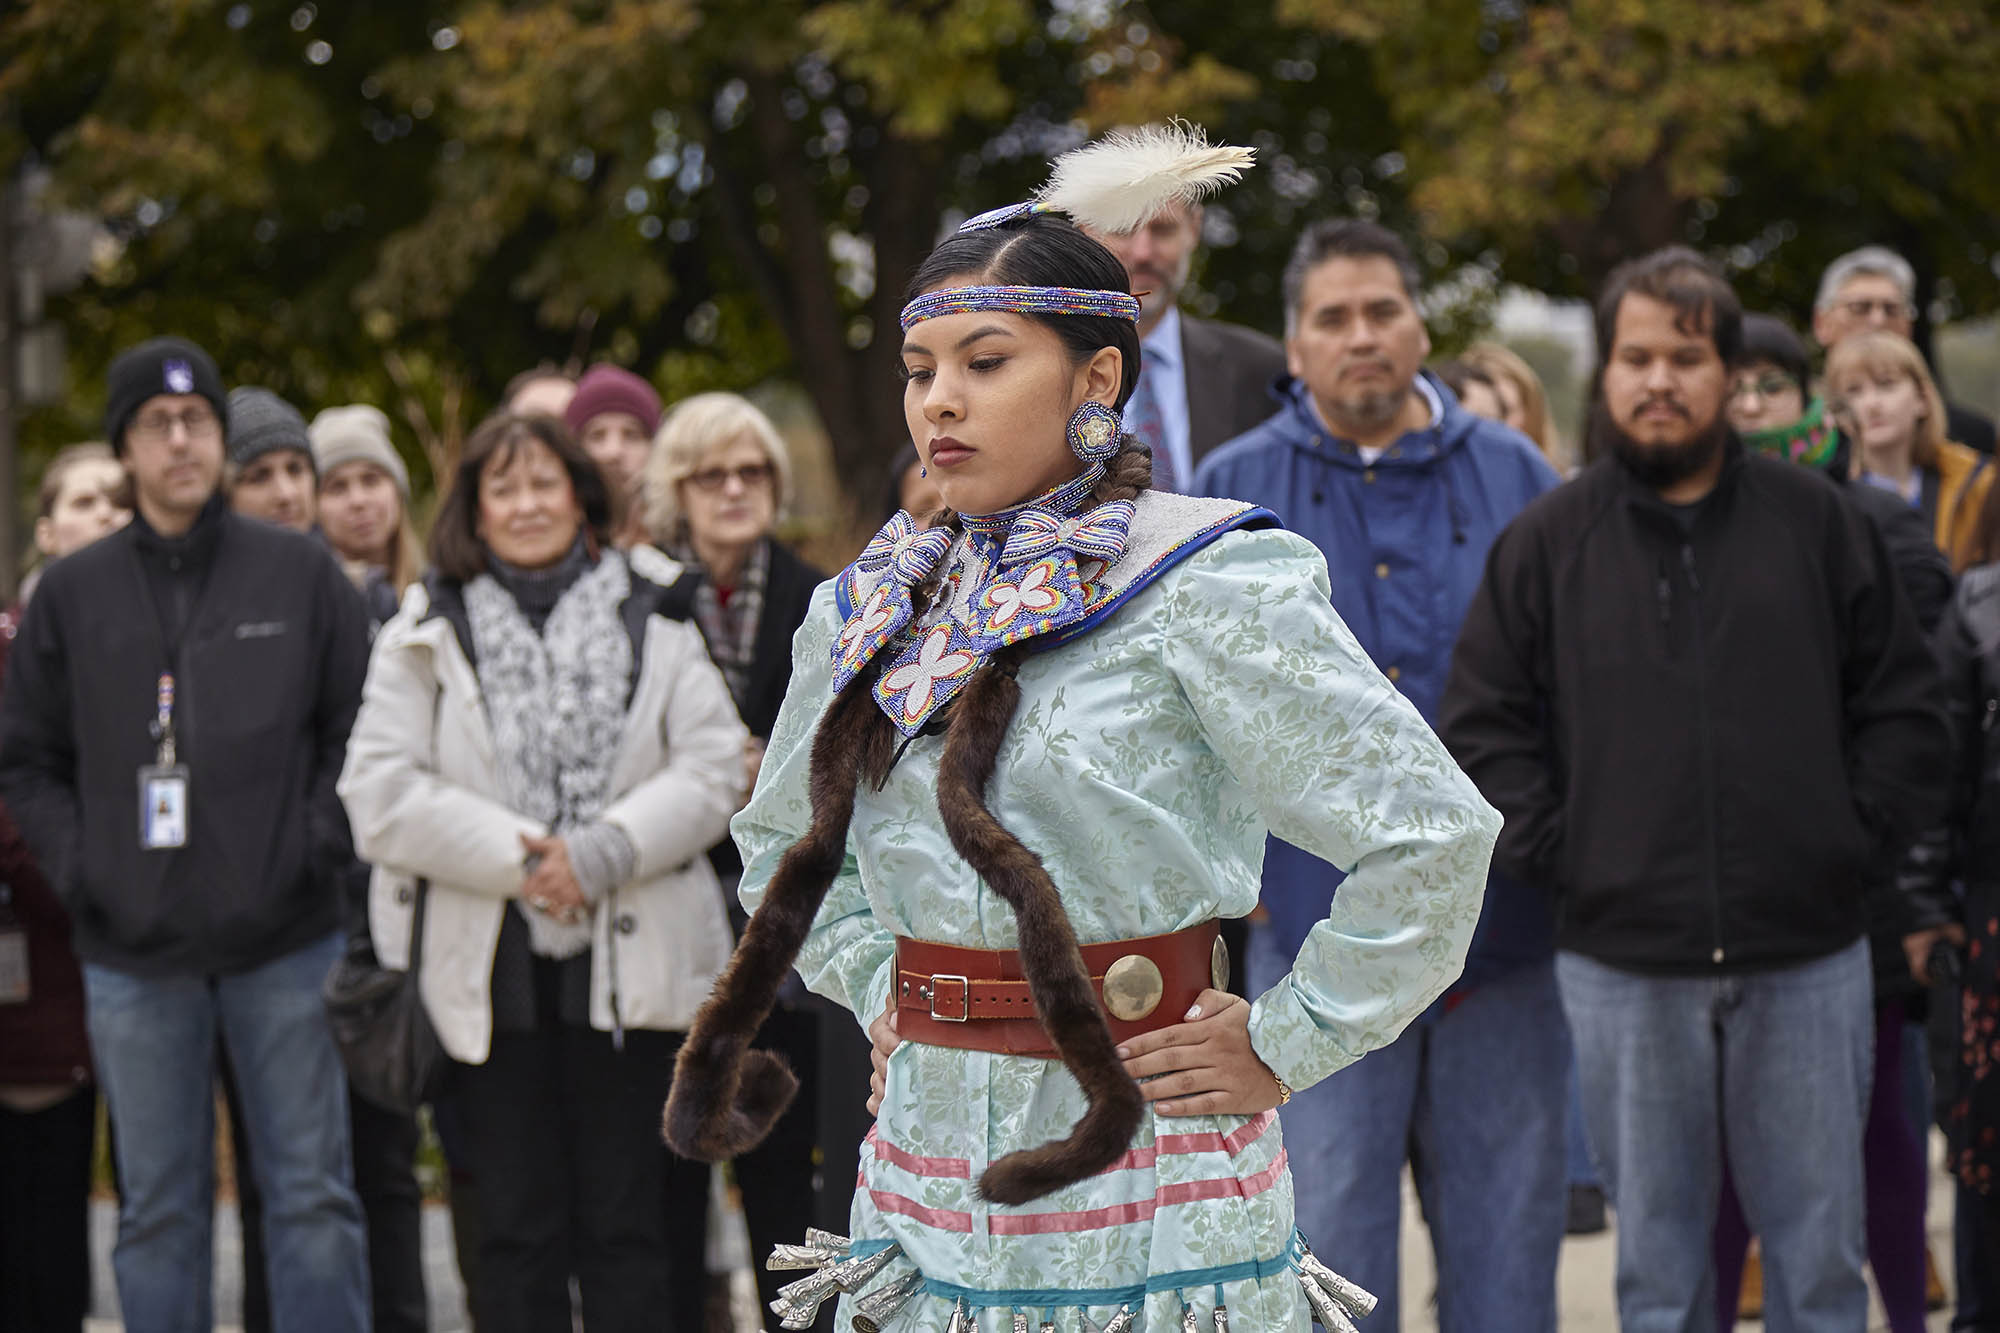 A woman, Maritza Garcia, wearing a light blue dress and a headdress with a feather, performs a dance in front of onlookers at the land acknowledgment ceremony.